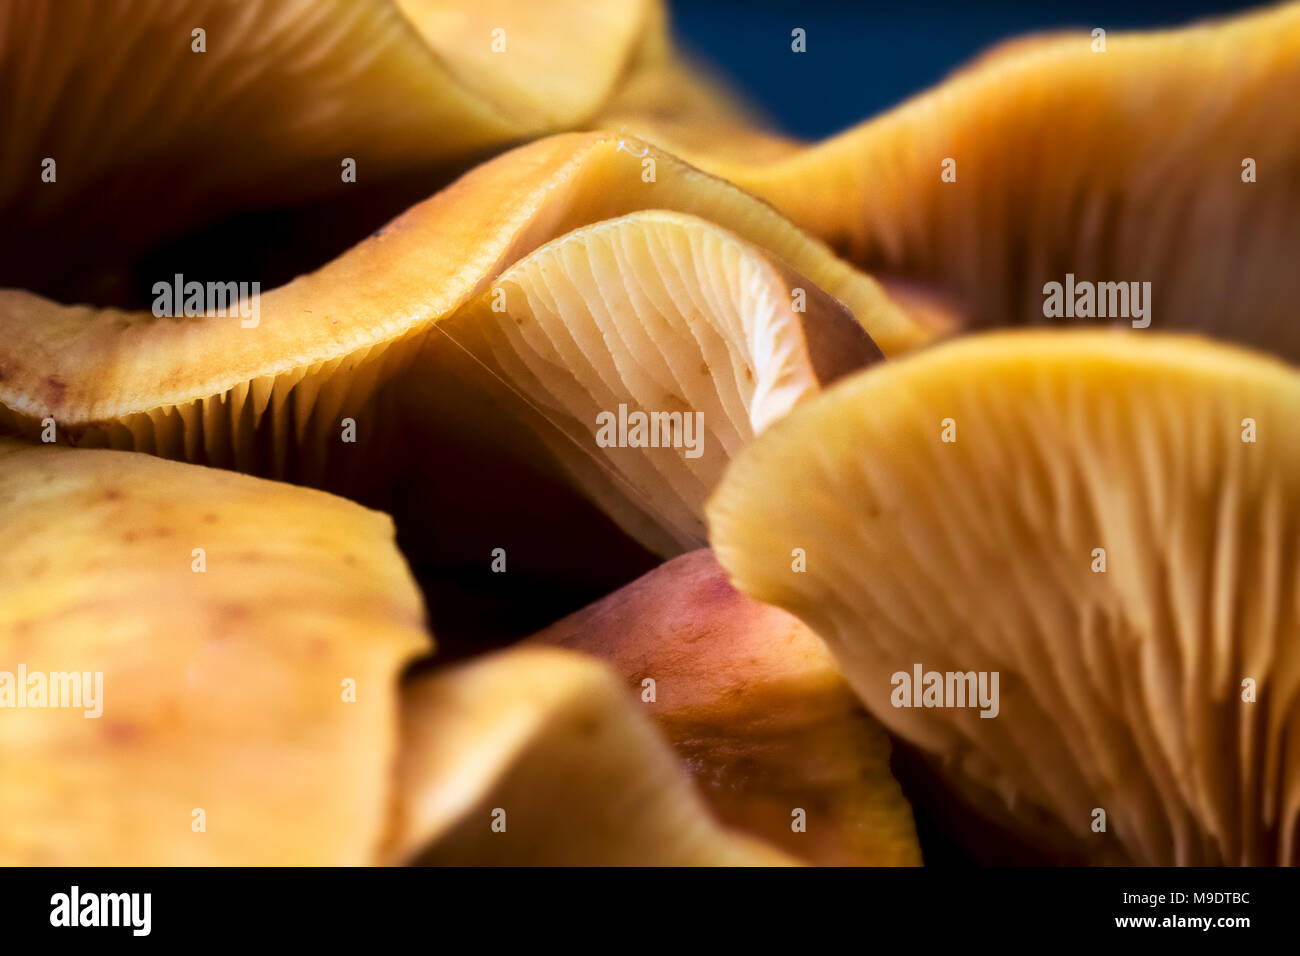 Macro photography of the chthonic and destructive Armillaria tabescens or honey fungus of the Armillaria genus showing structure and pigmentation Stock Photo